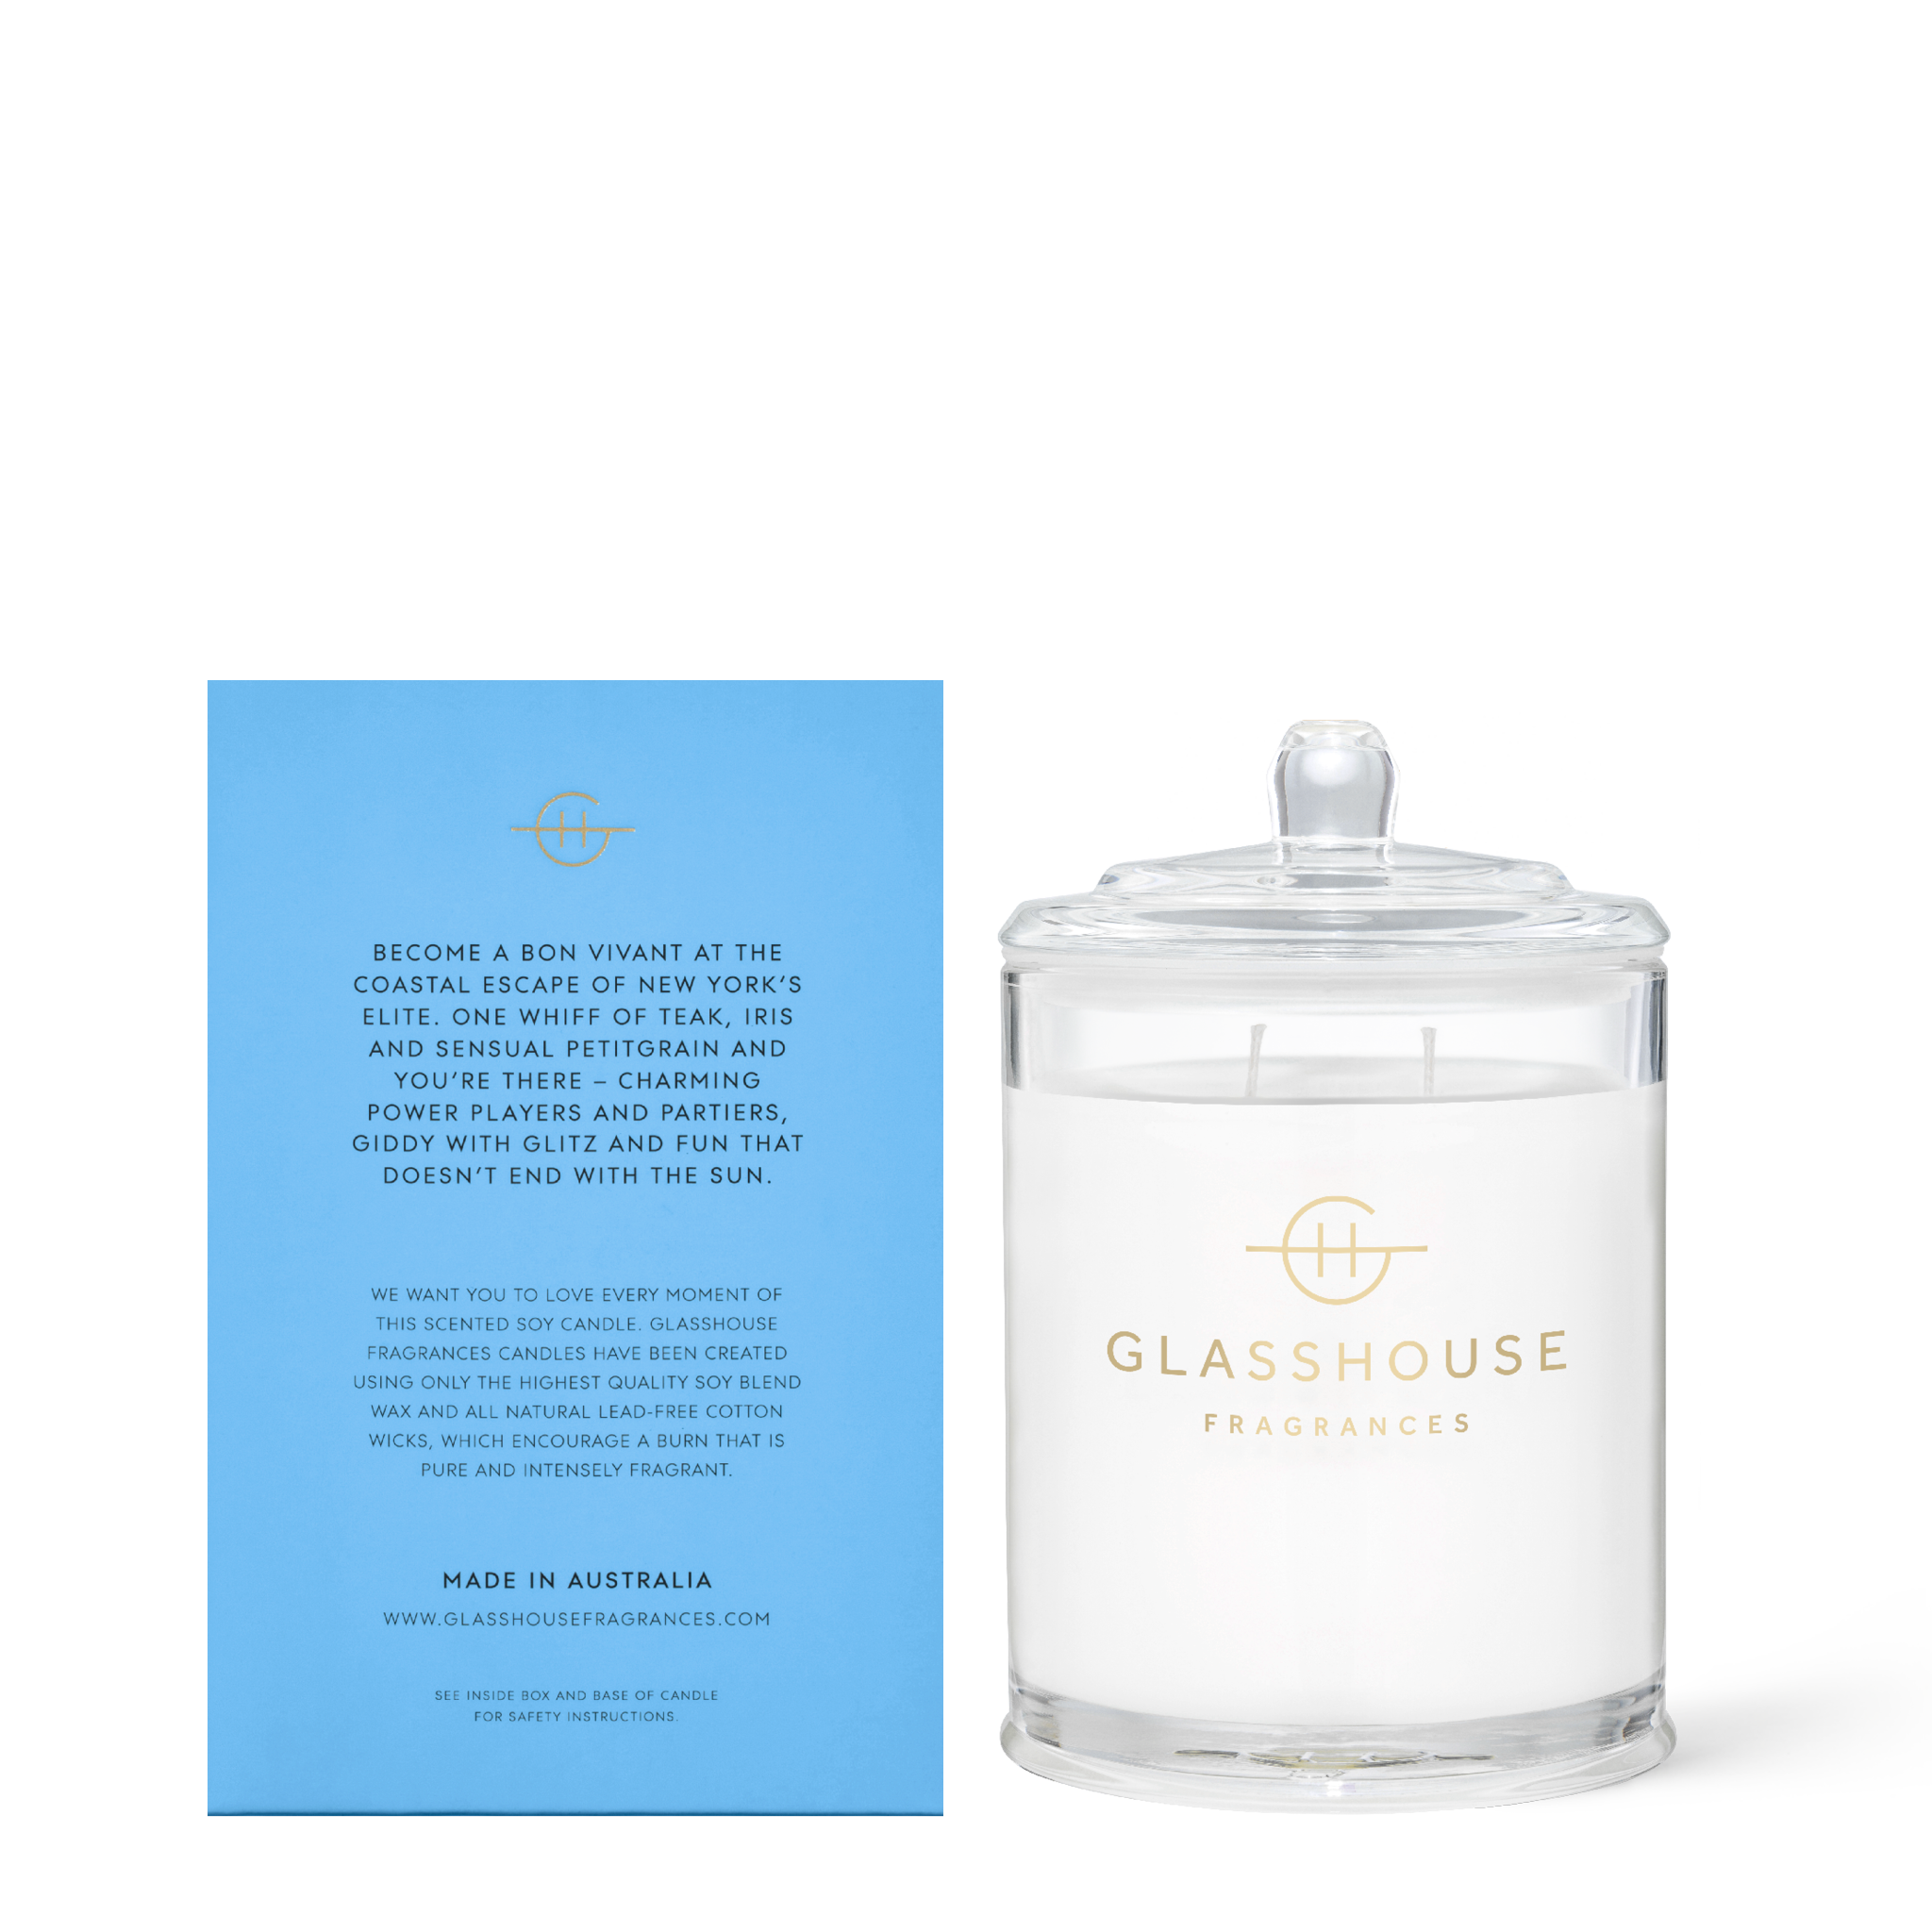 Glasshouse Fragrances The Hamptons Teak and Petitgrain 380g Soy Candle with box - back of product shot